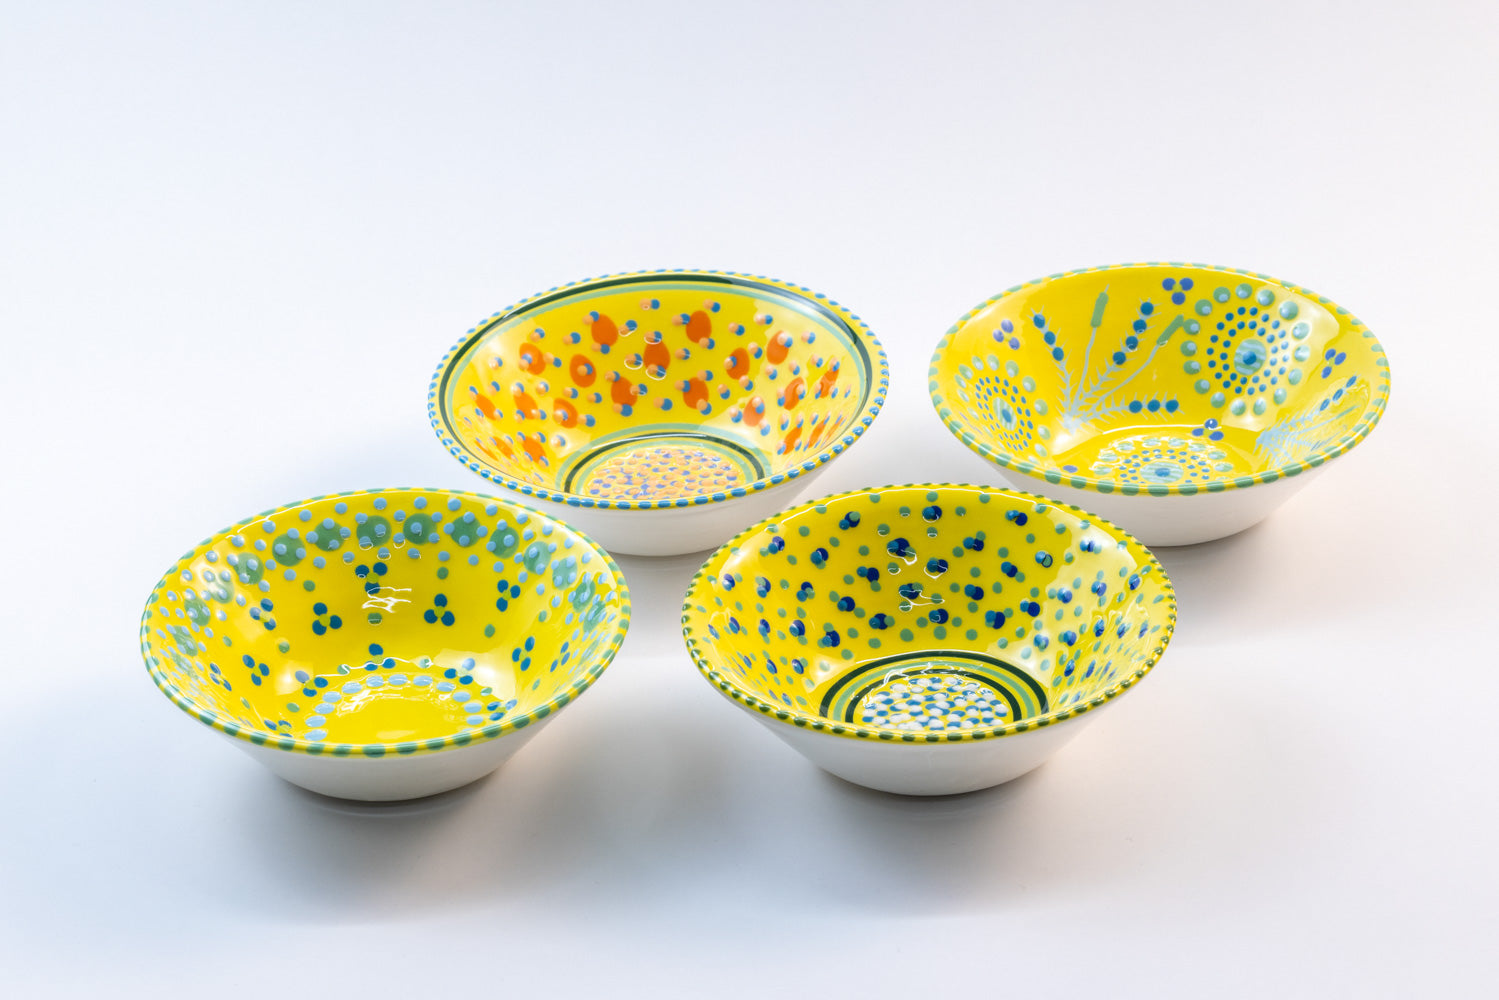 4 'nut' size ceramic bowls with yellow base color. Dots & Stripes painted on top in orange, jasper green & blue.